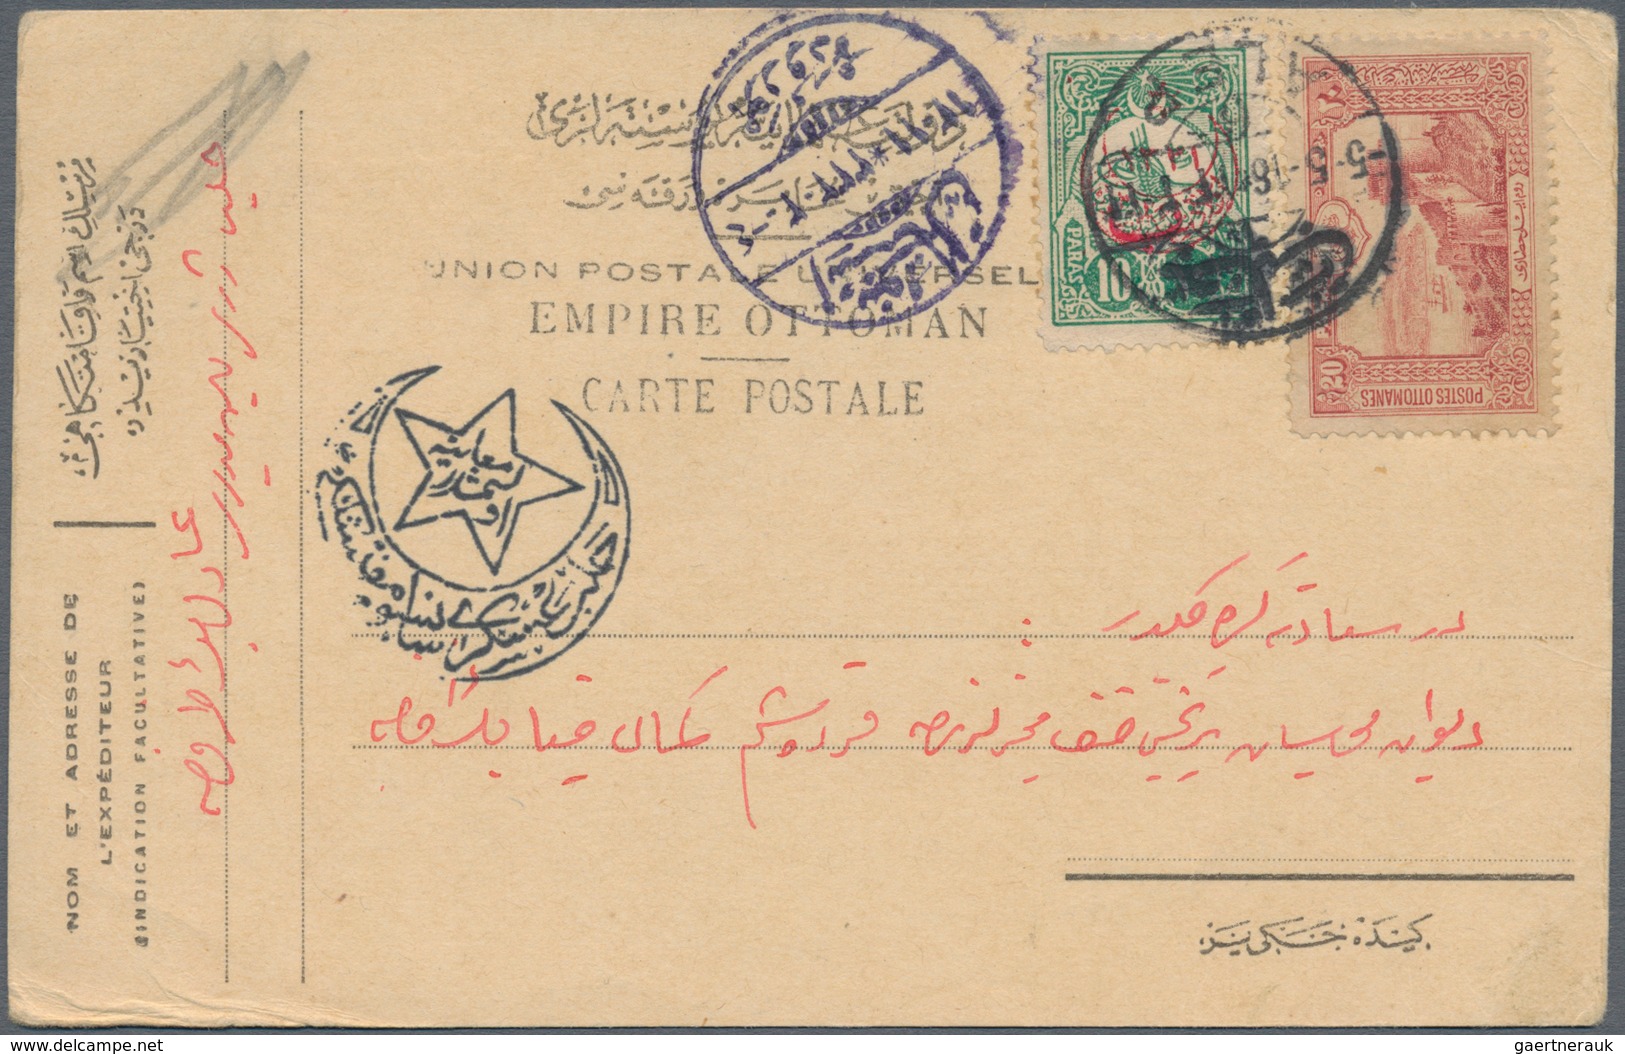 Türkei: 1900/1940 (ca.), 75 envelopes and postal stationeries, many of them used in today's Syria, w